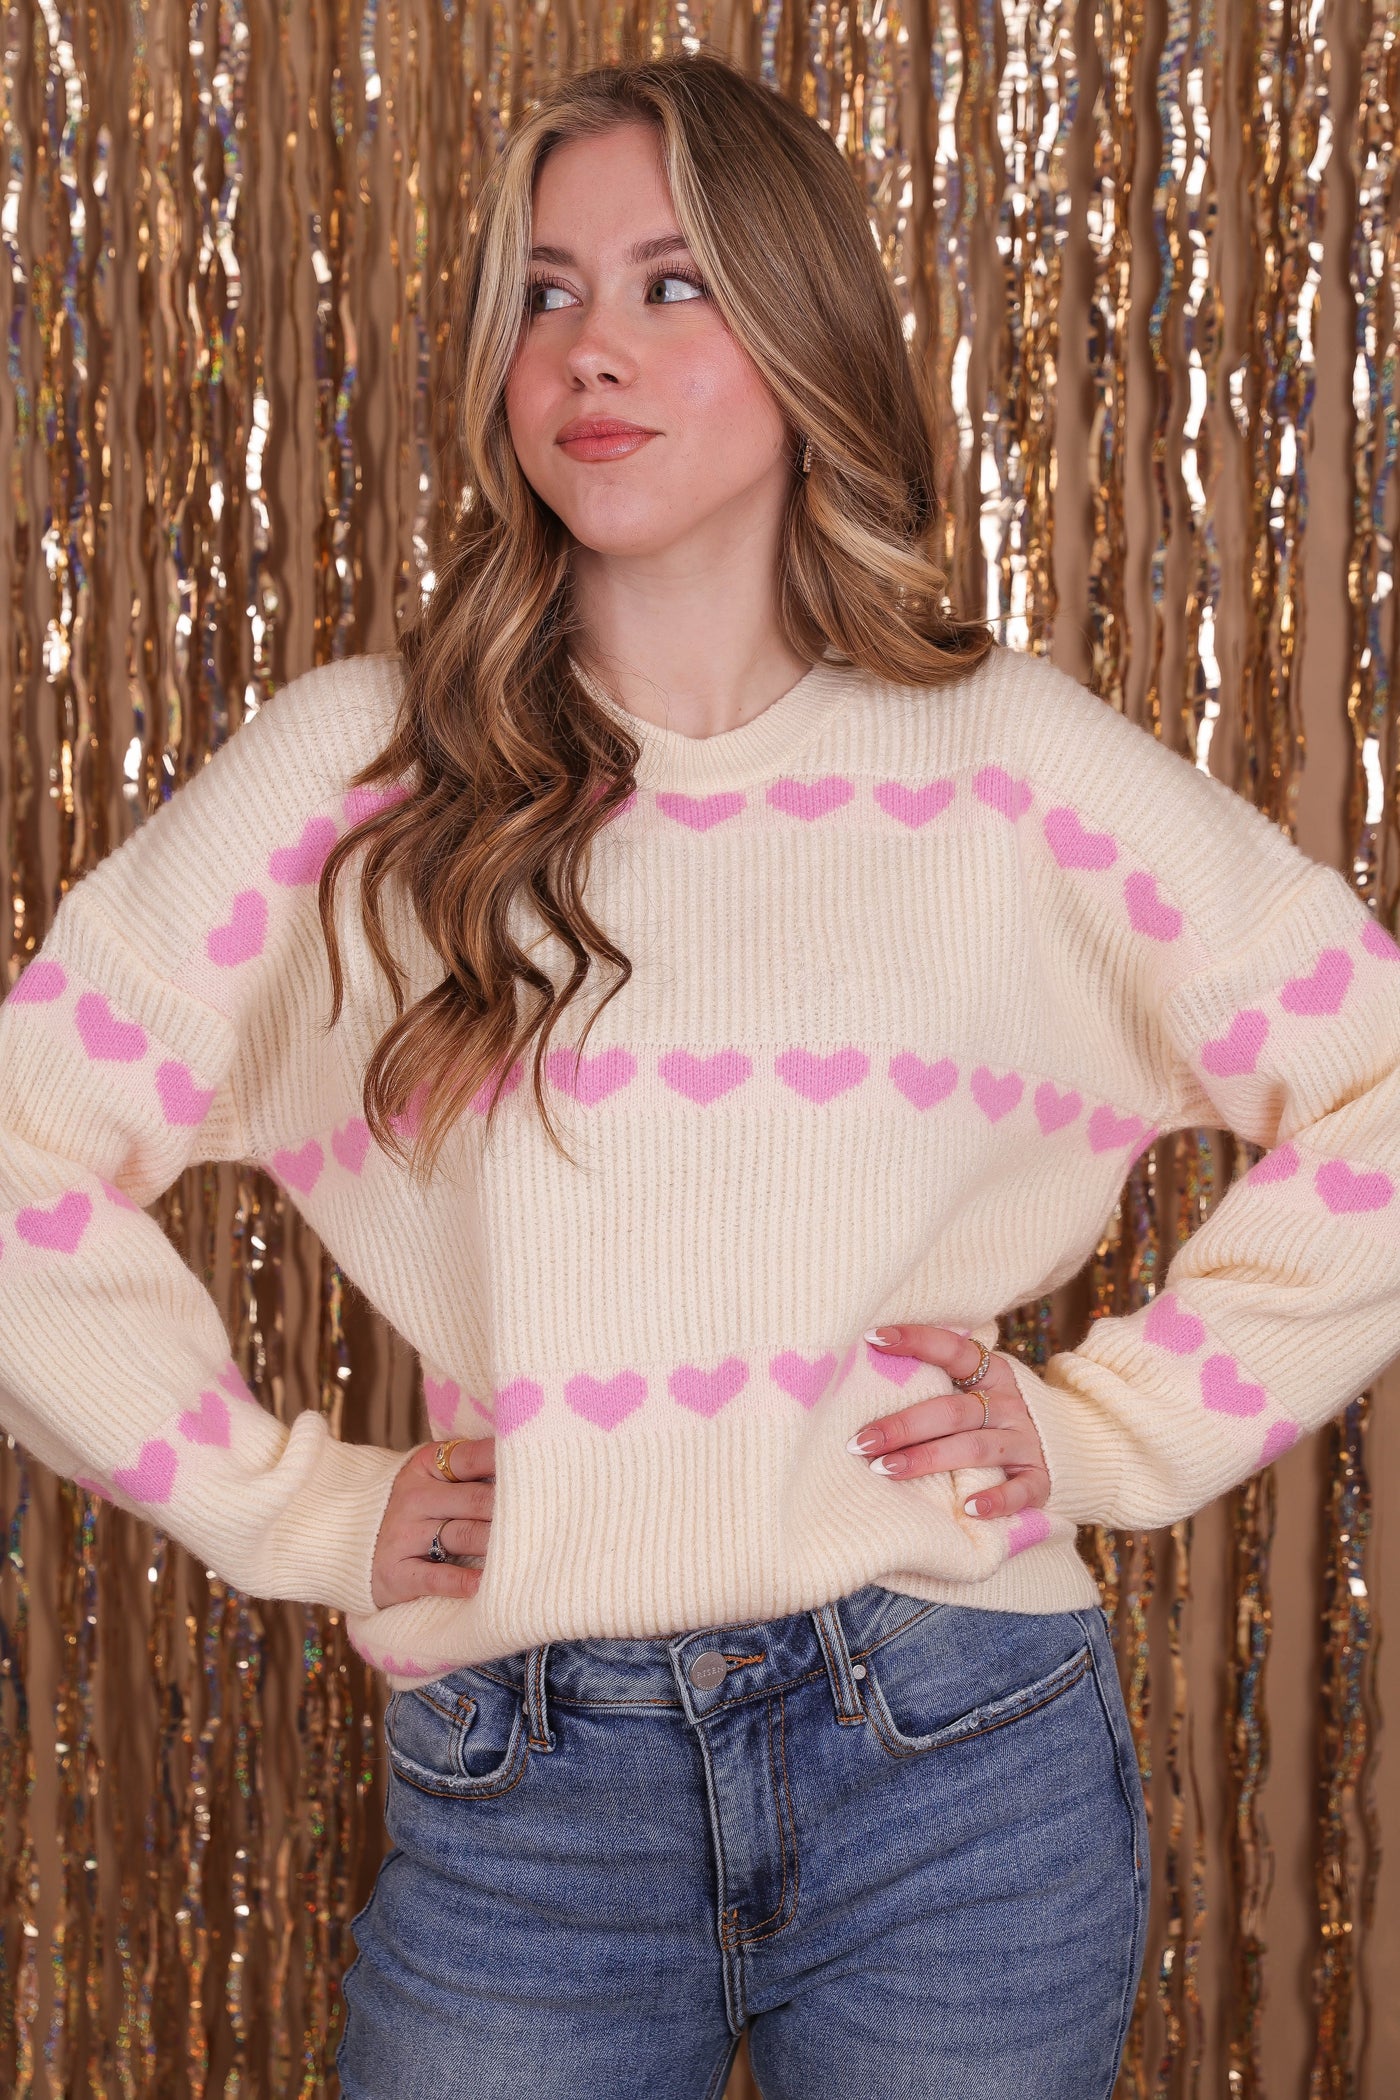 Darling Ivory and Pink Heart Sweater- Women's Sweater With Pink Hearts- &Merci Heart Sweater